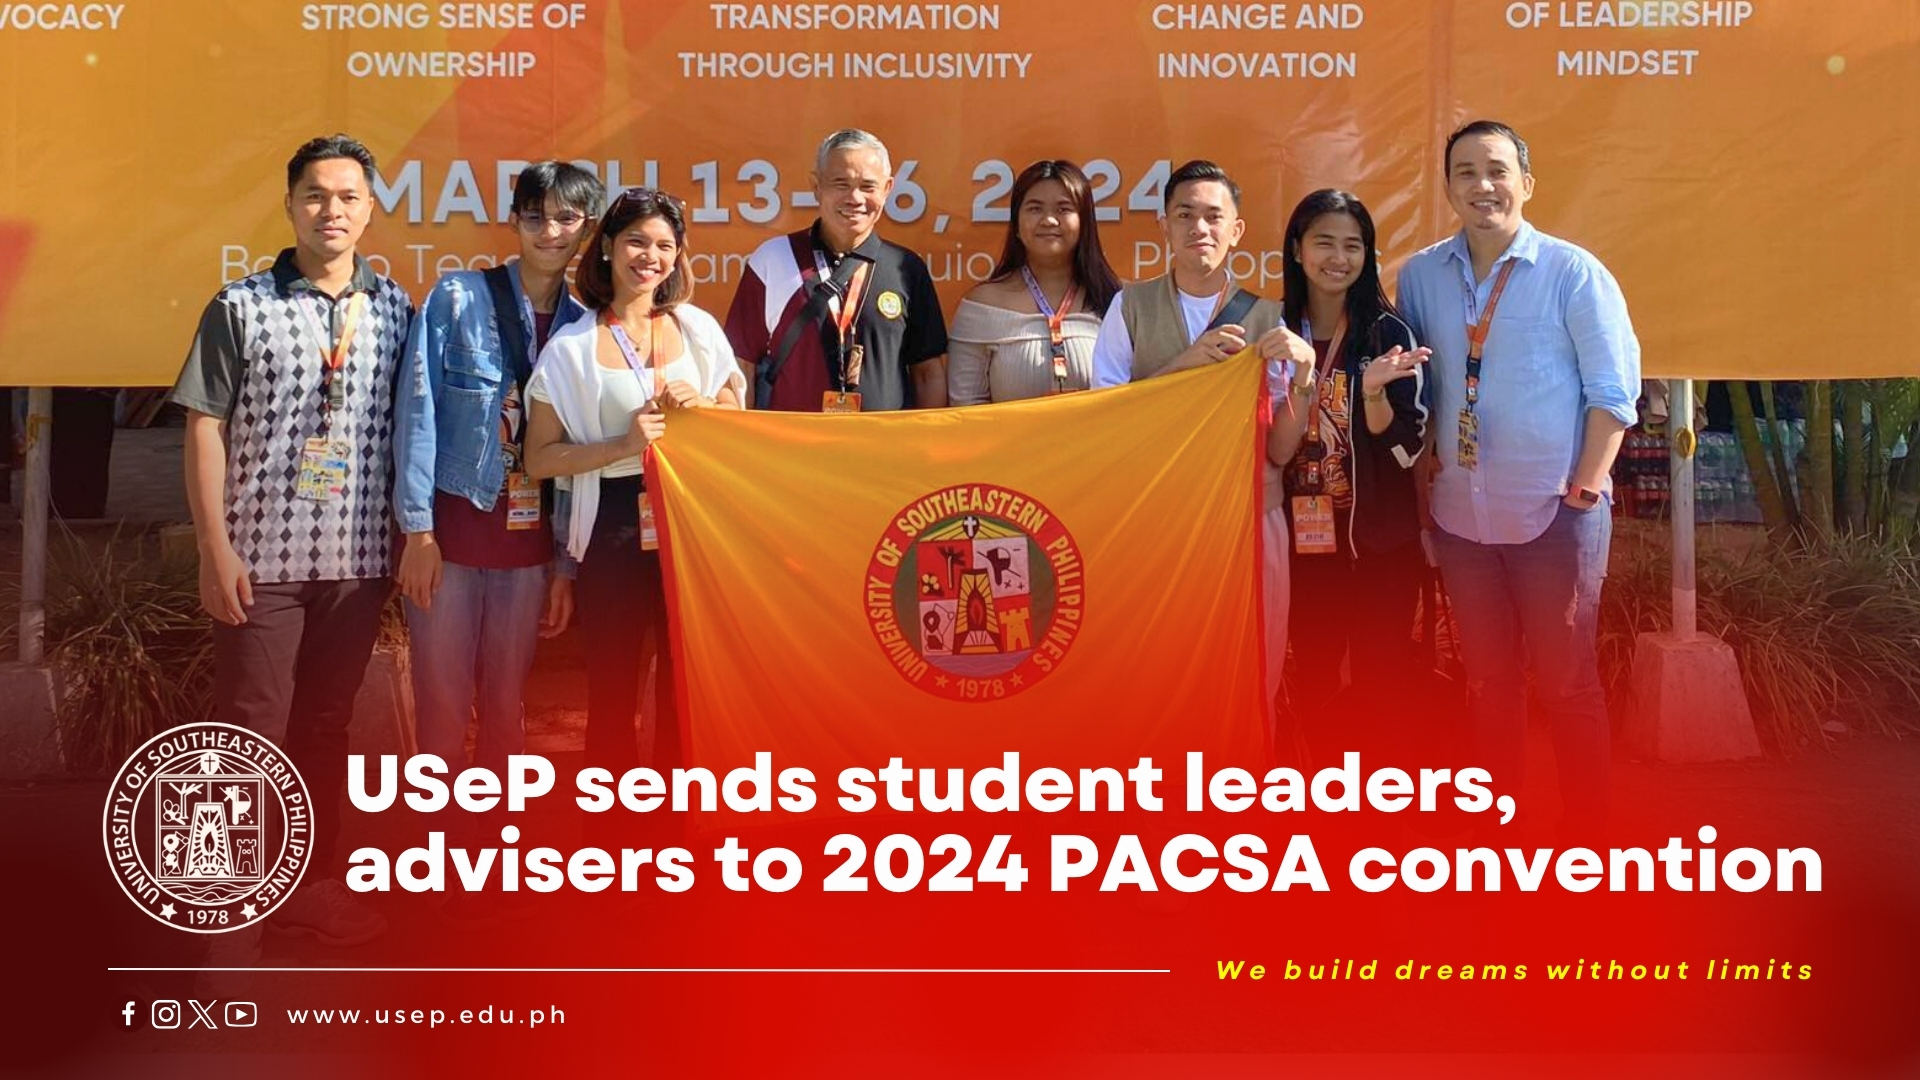 USeP sends student leaders, advisers to 2024 PACSA convention